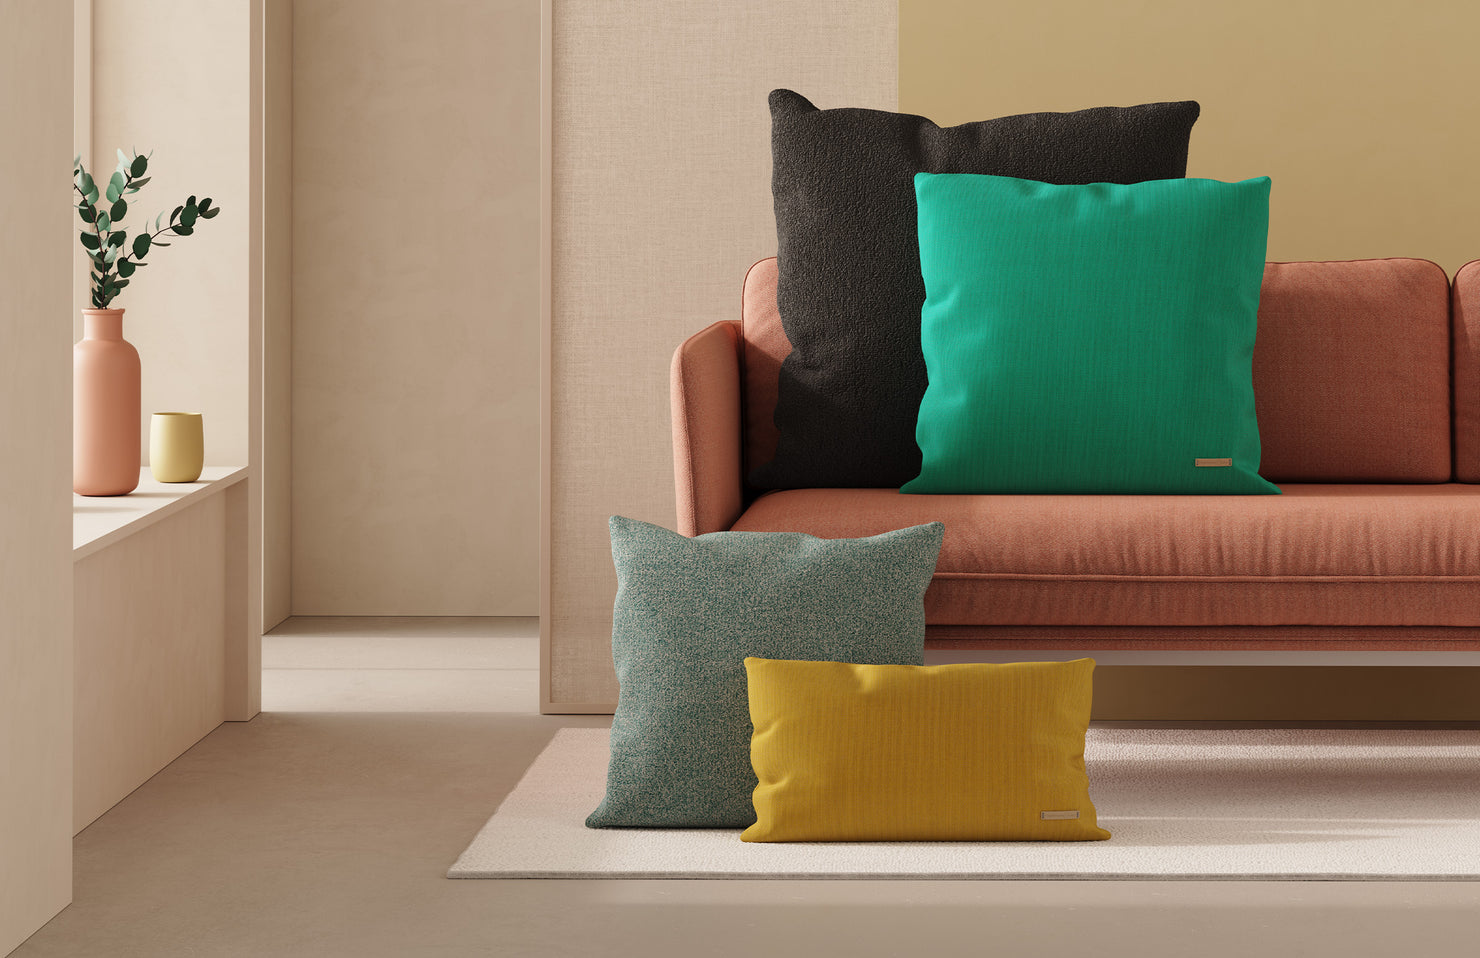 How to decorate a couch with throw pillows – Design Studio 210